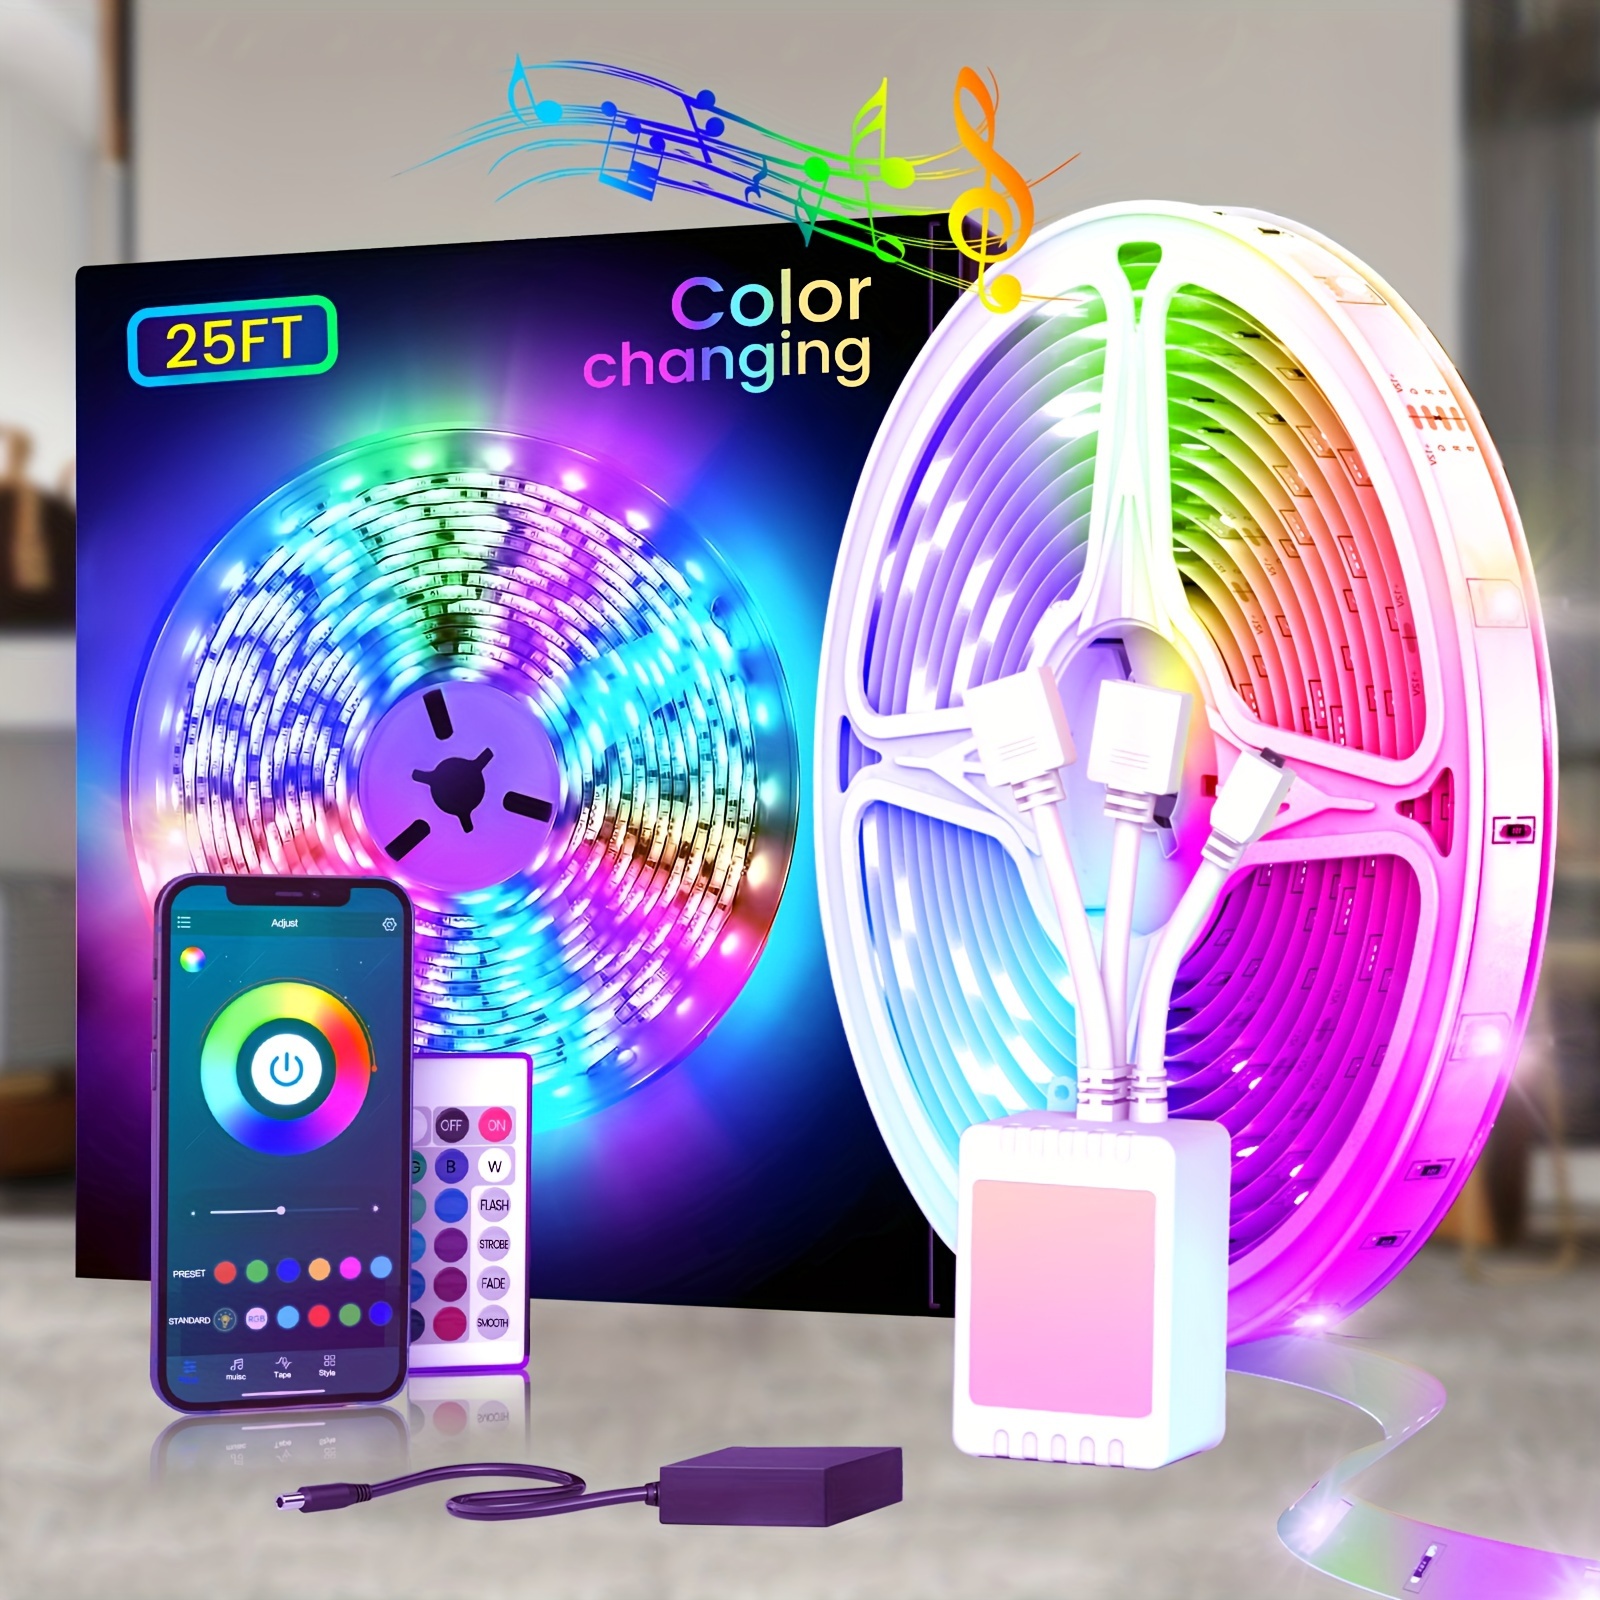 

Led Strip Lights For Bedroom (25/100/130ft) Music Sync Color Changing, Rgb Color Changing, Led Strip Lights With 24-key Remote And App Control, Light Strip For Home Party Room Decoration